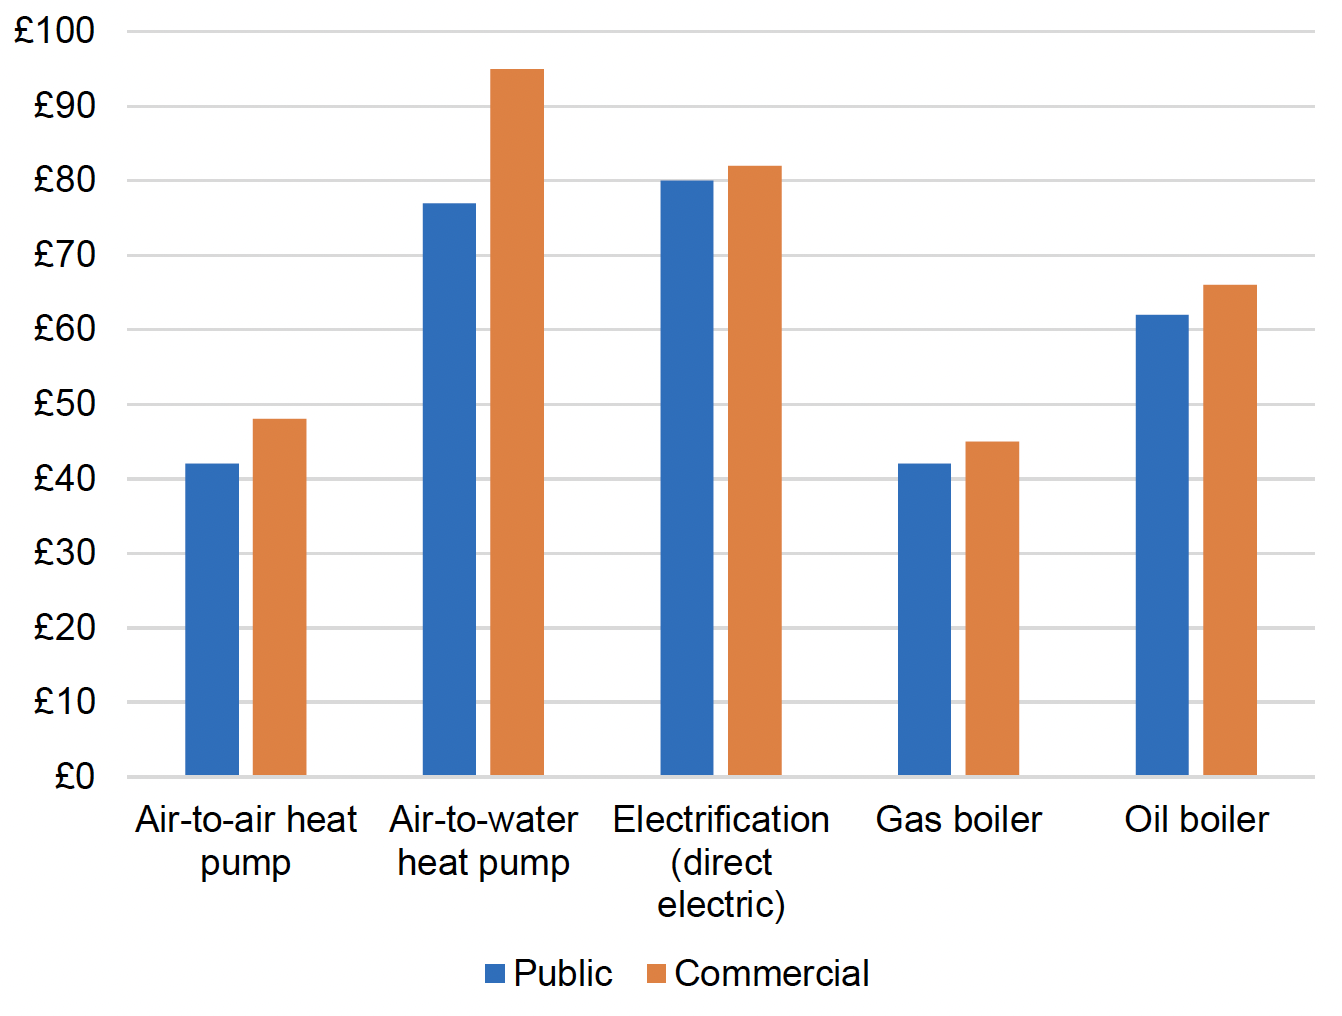 A bar chart showing estimated cost per MWh for air-to-air heat pumps, air-to-water heat pumps, direct electric, gas boilers and oil boilers in the non-domestic buildings sector. The highest per MWh costs are for air-to-water heat pumps (£77-£95) and direct electric (around £80). The lowest per MWh costs are for air-to-air heat pumps (£42-£48) and gas boilers (£42-£45).